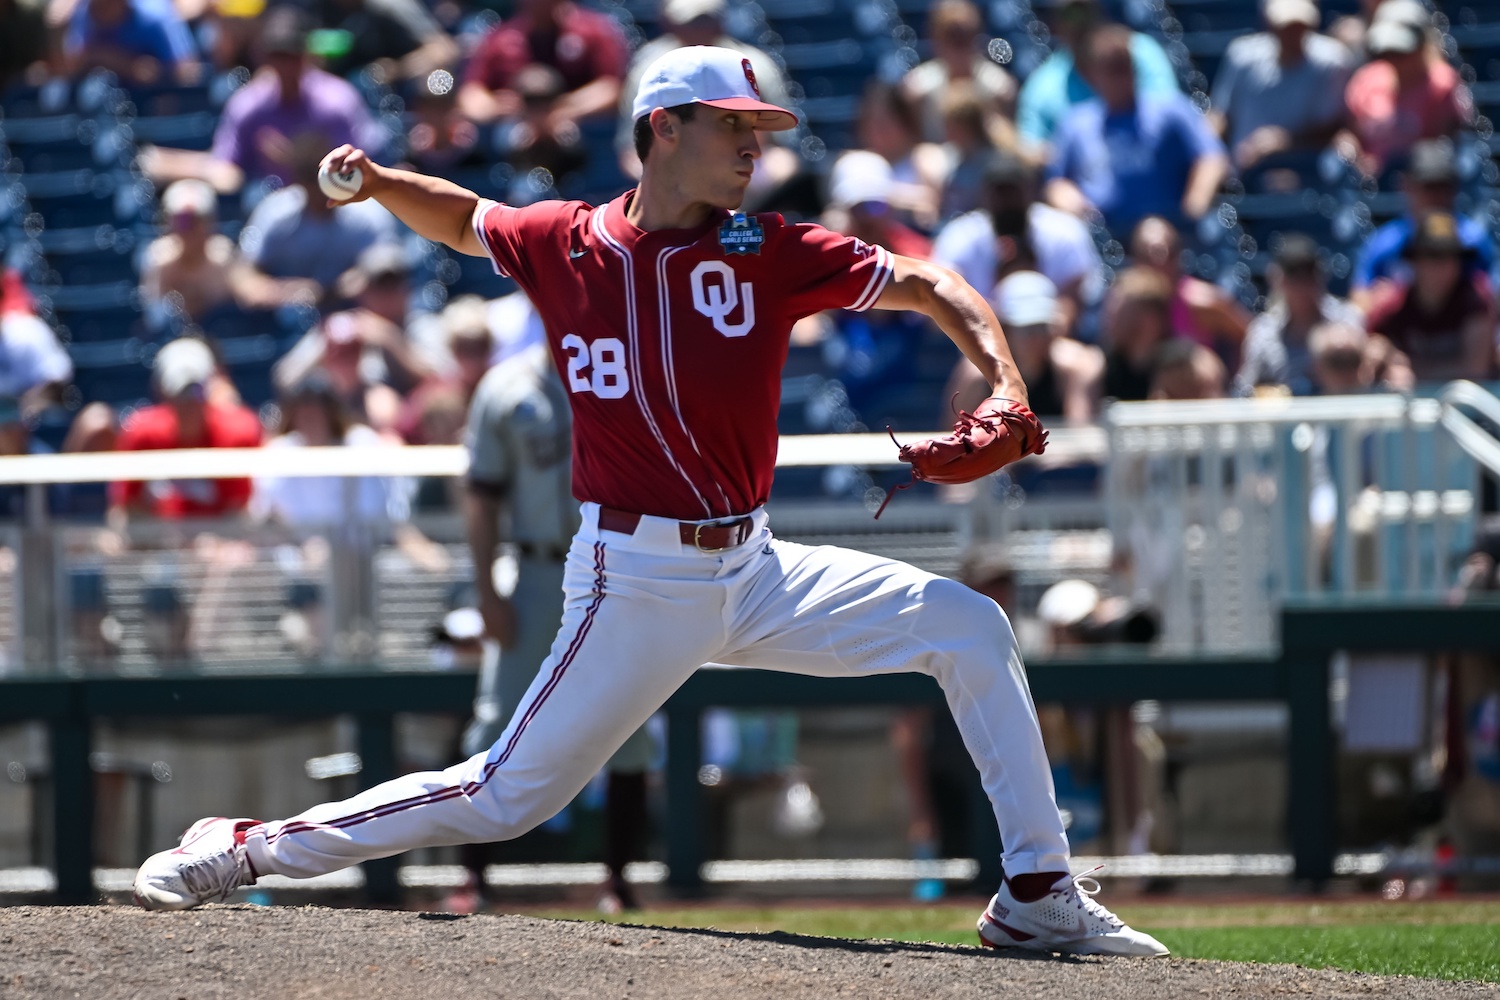 Jun 22, 2022; Omaha, NE, USA; Oklahoma Sooners starting pitcher David Sandlin (28) throws in the fourth inning against the Texas A&M Aggies at Charles Schwab Field. Mandatory Credit: Steven Branscombe-USA TODAY Sports